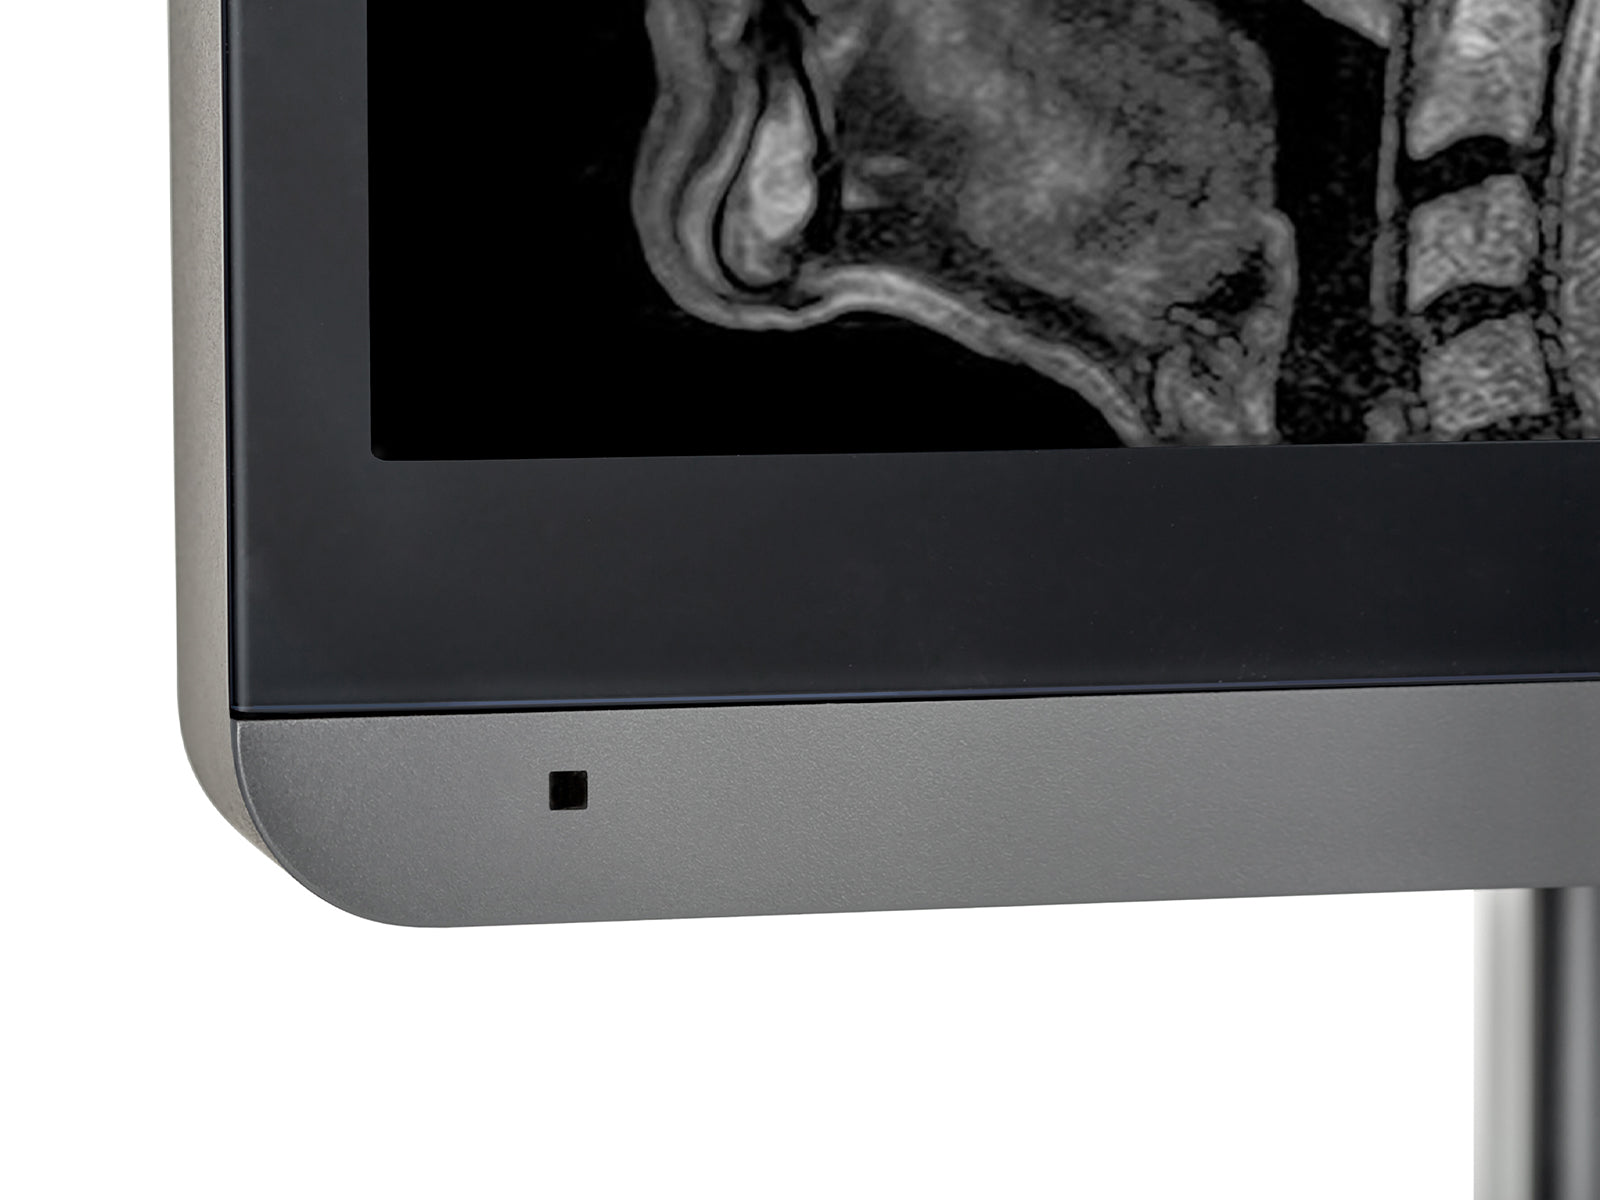 JVC Totoku MS-S200 2MP 21" Grayscale Diagnostic Radiology Display Monitor (MS-S200) Monitors.com 